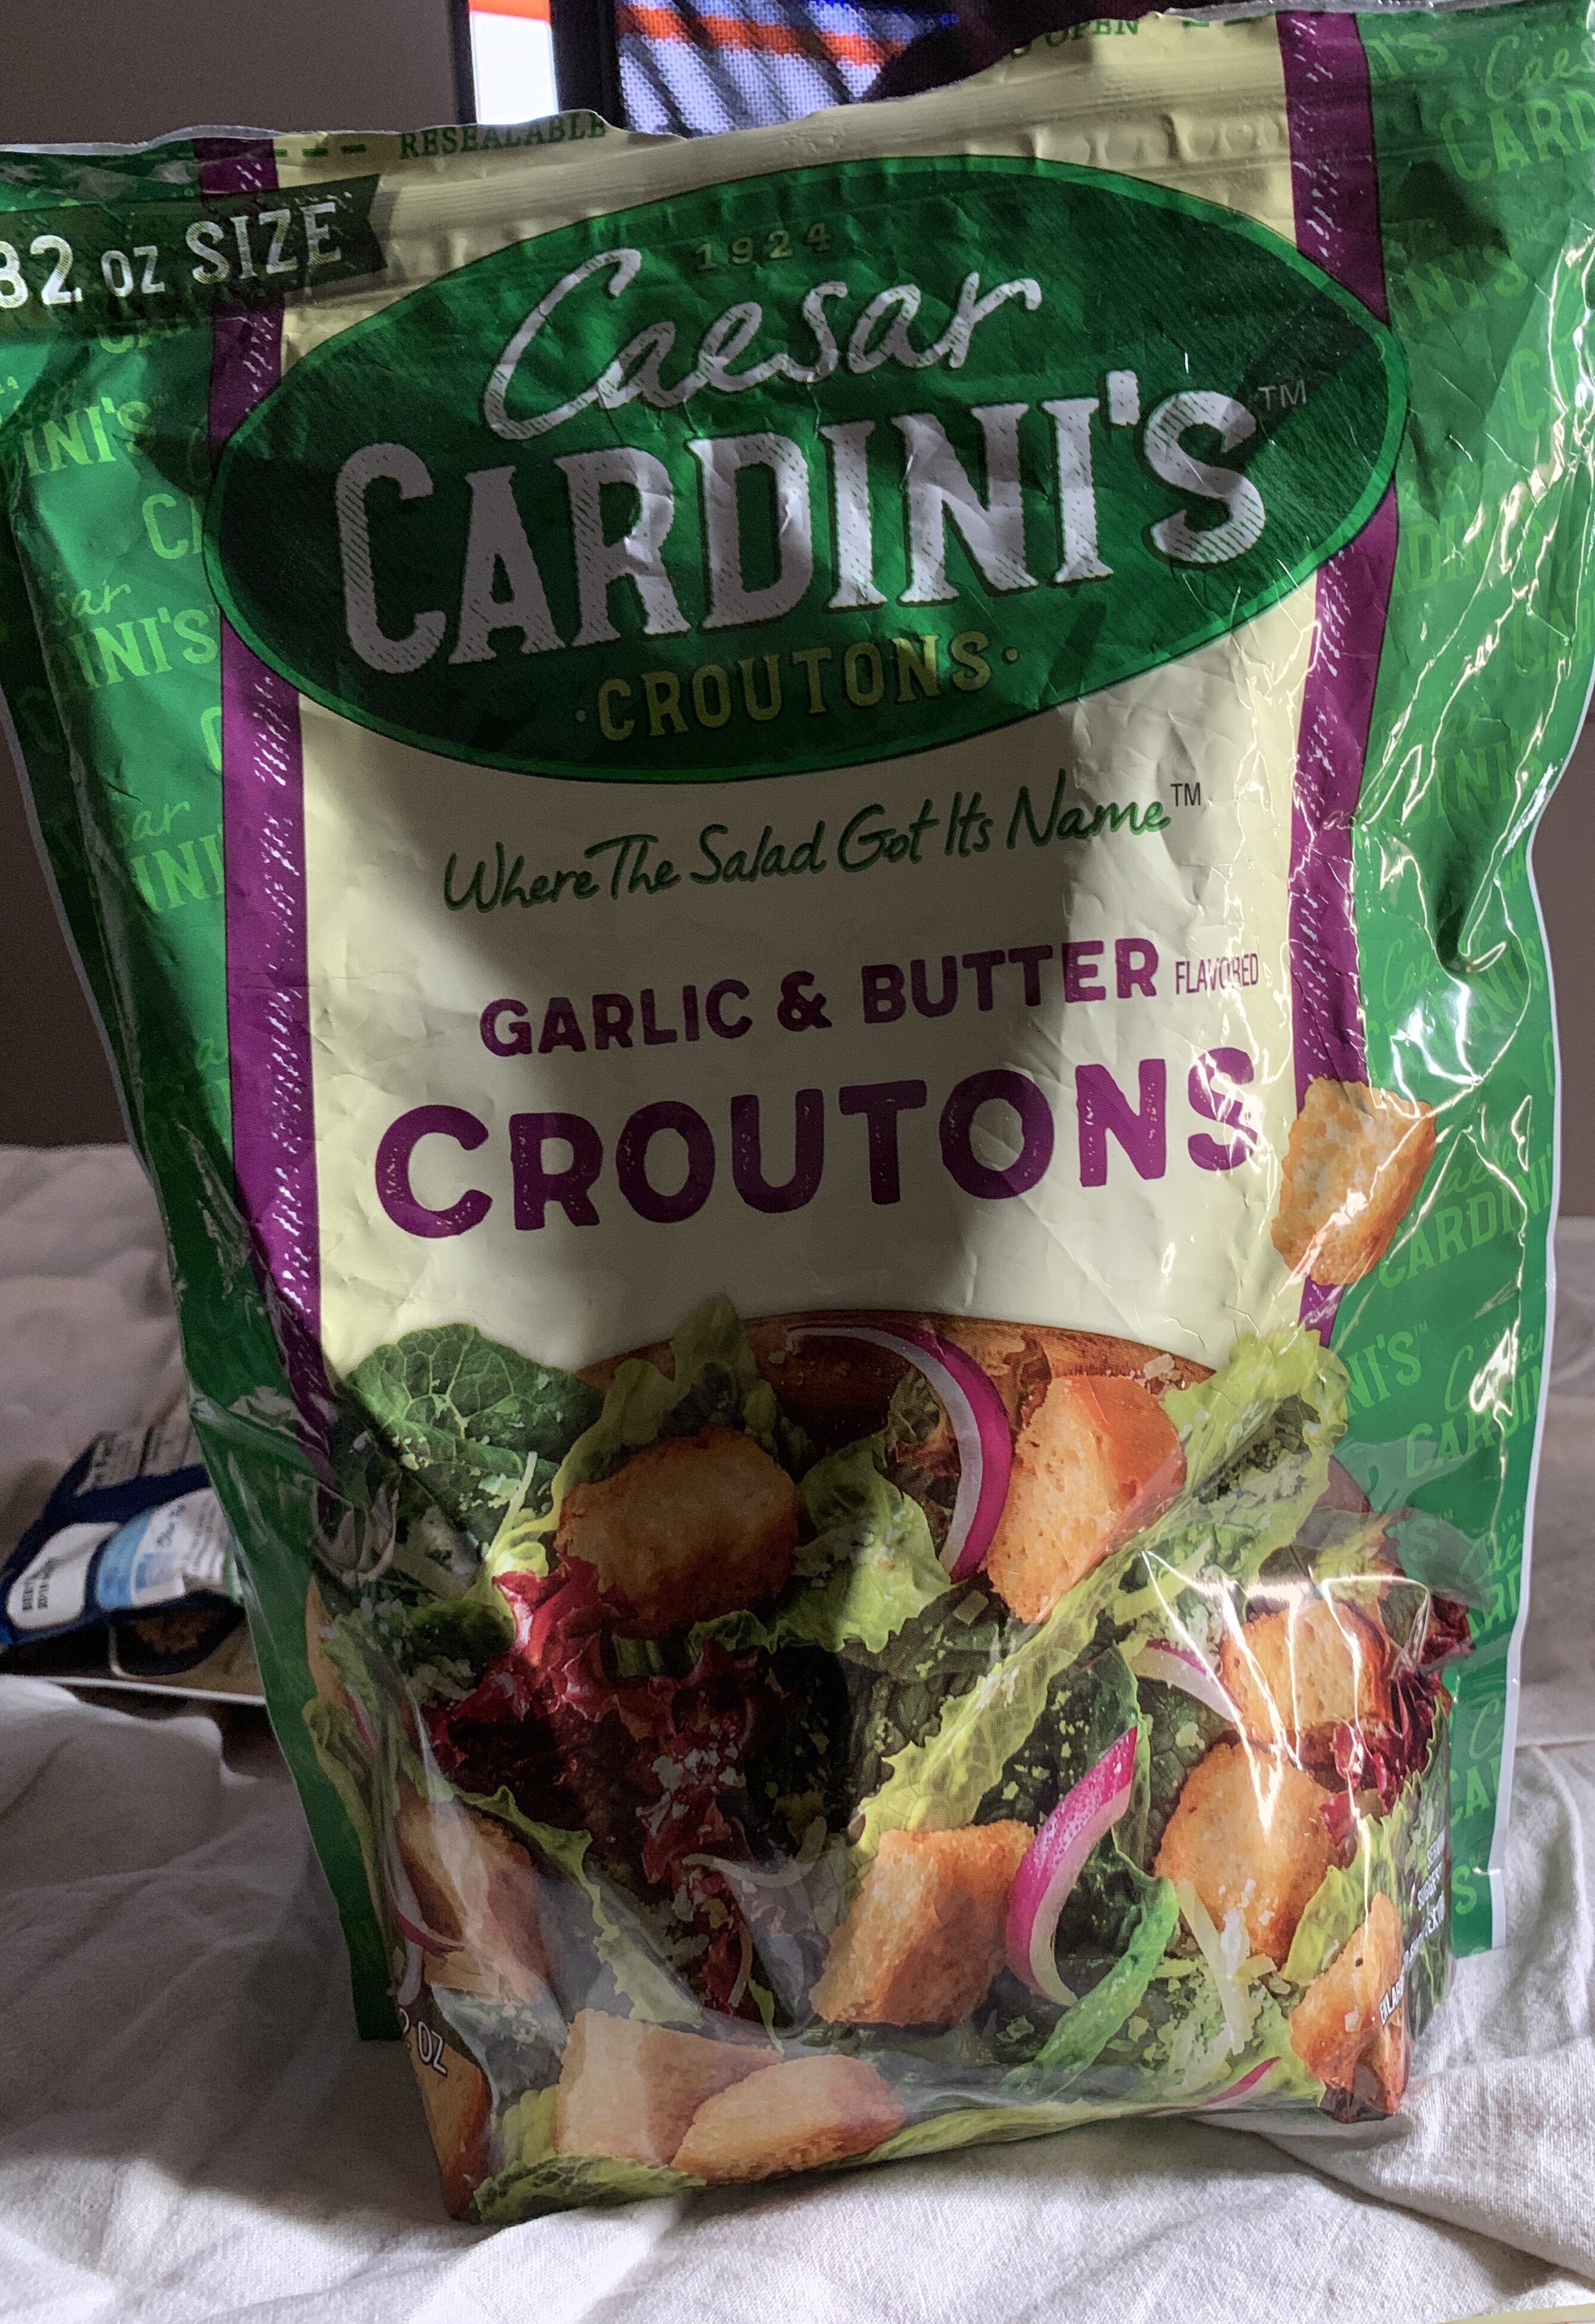 Garlic & butter flavored croutons - Product